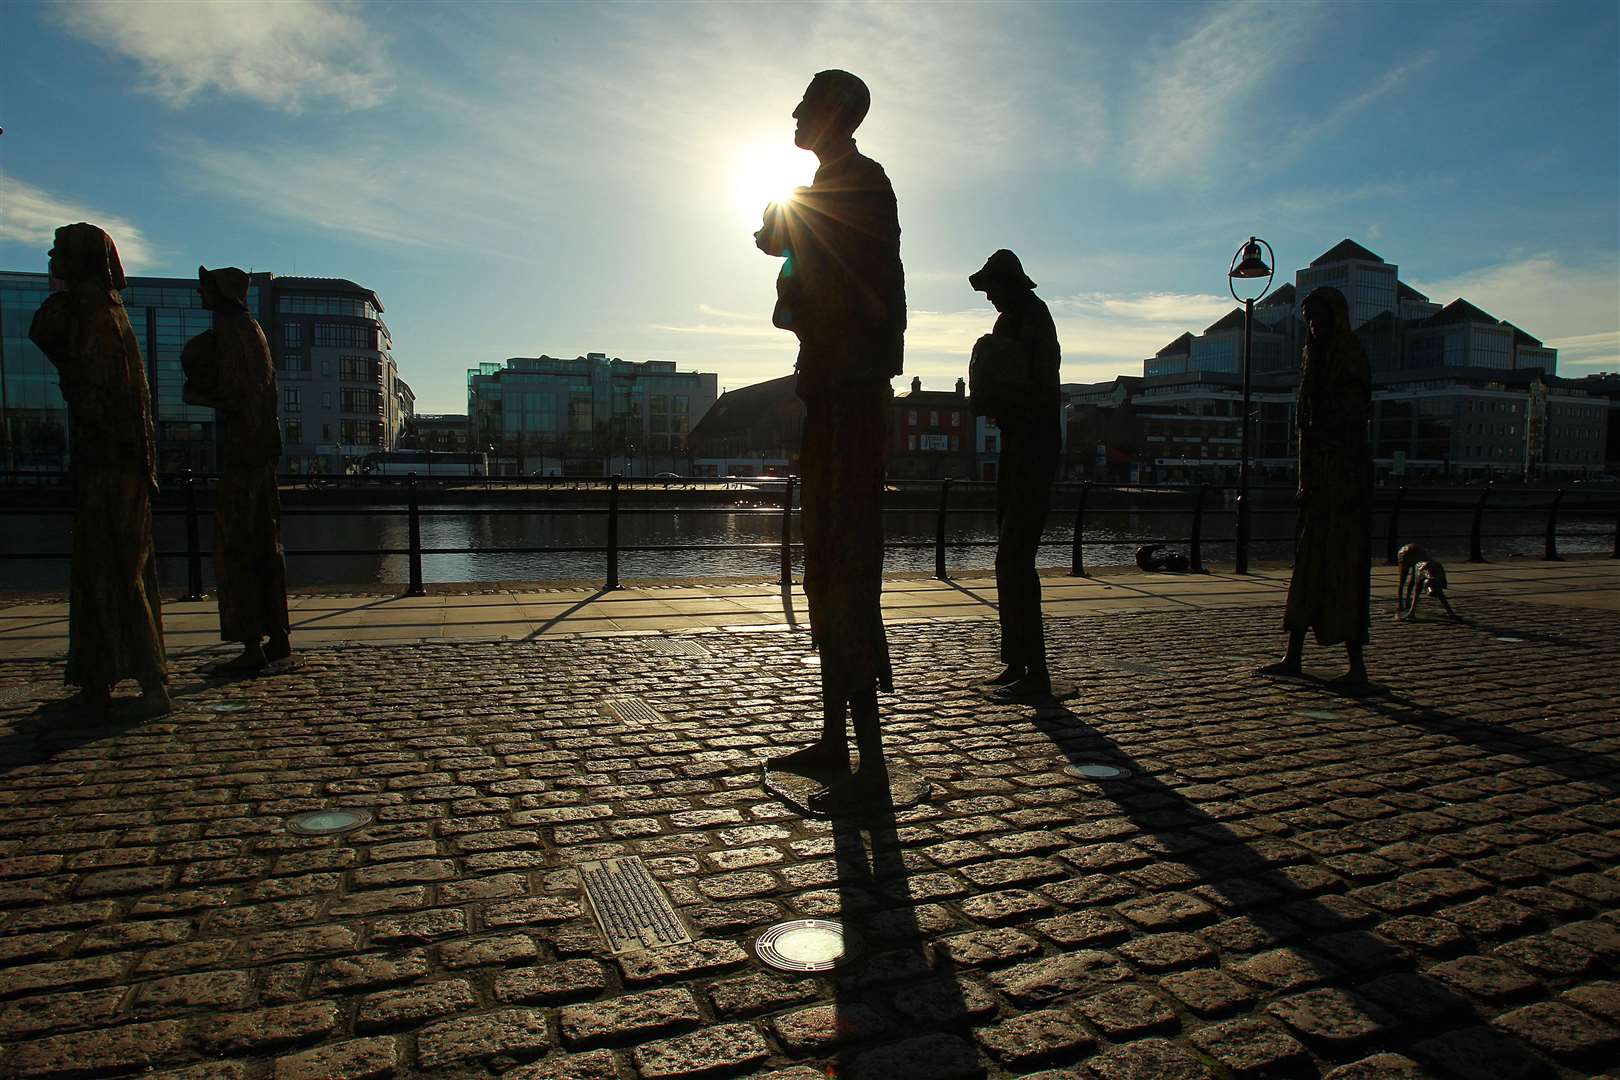 Statues commemorating the Great Famine (1845-1852) in Ireland (Julien Behal/PA)